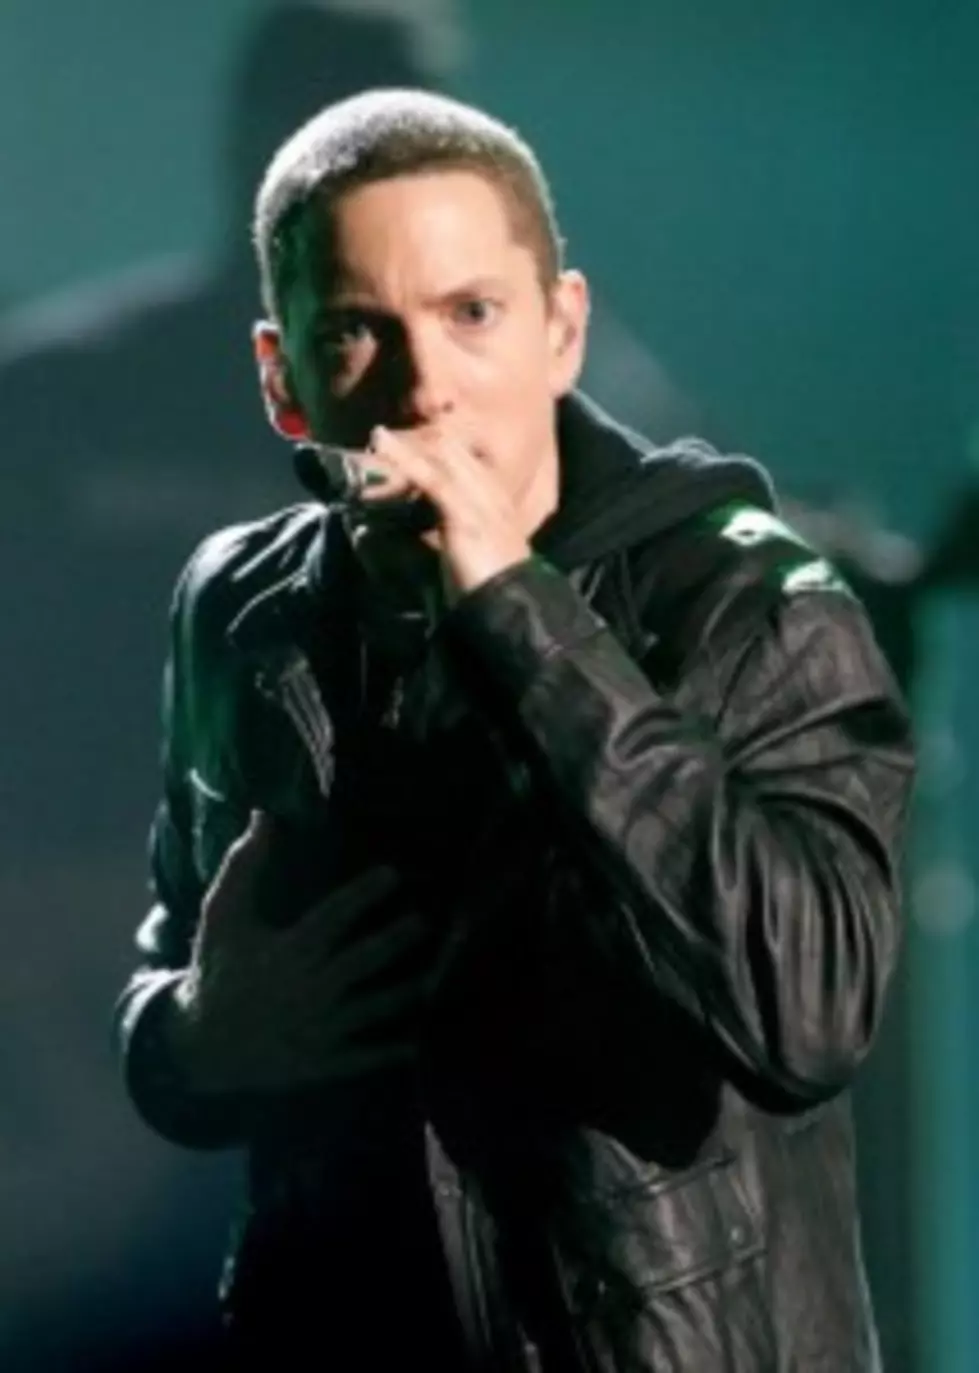 Eminem Gets A Million From Lipton For Superbowl Ad